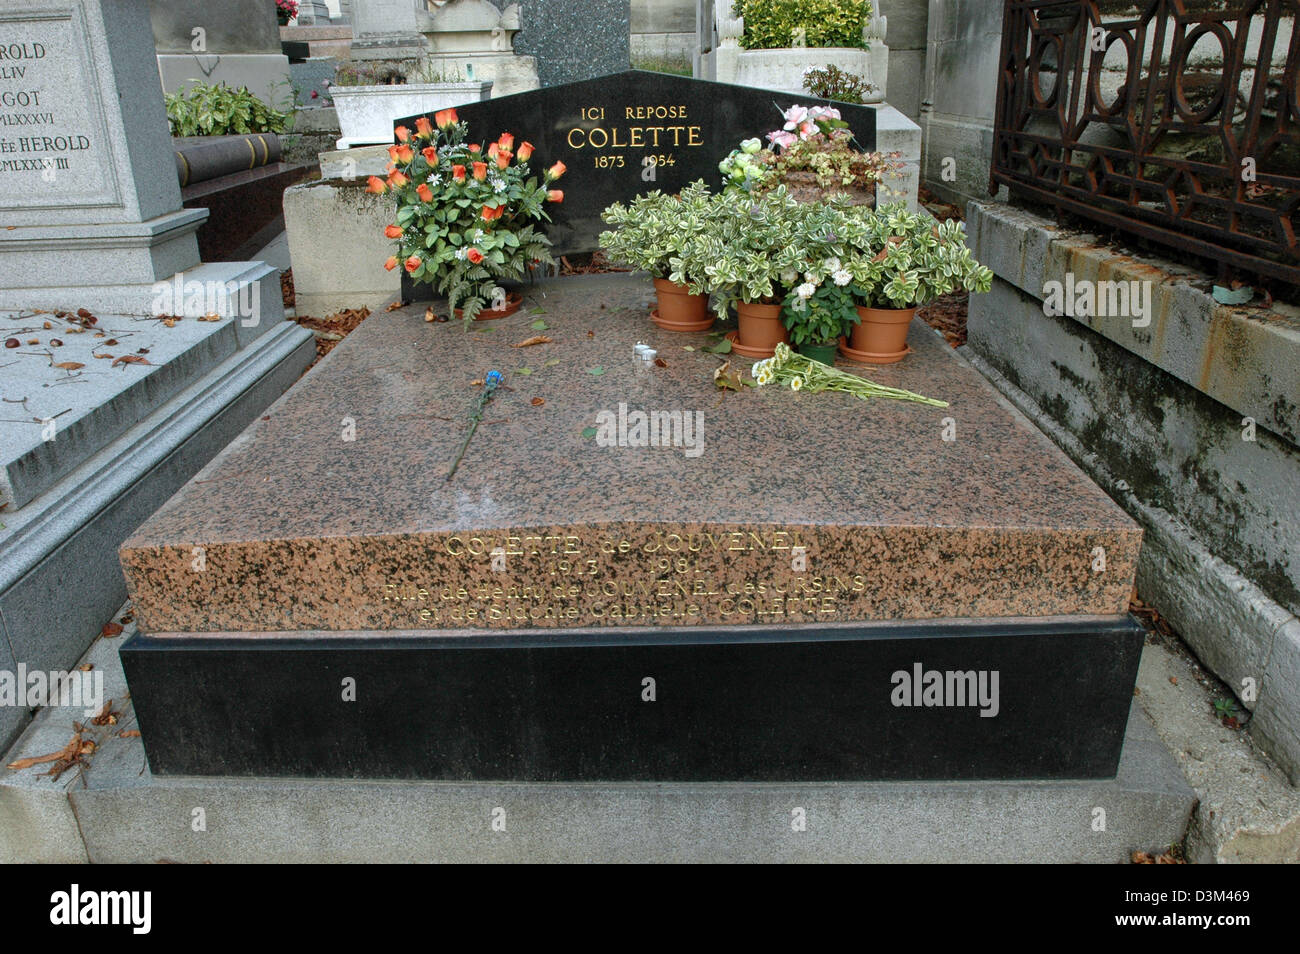 (dpa) - The photo shows the grave of French author Colette (aka Sidonie Gabrielle Colette) at the Pere Lachaise cemetery in Paris, France, 08 October 2005. Colette was born in Saint-Sauveur-en-Puisaye on 28 January 1873 and died in Paris on 03 August 1954. Photo: Helmut Heuse Stock Photo